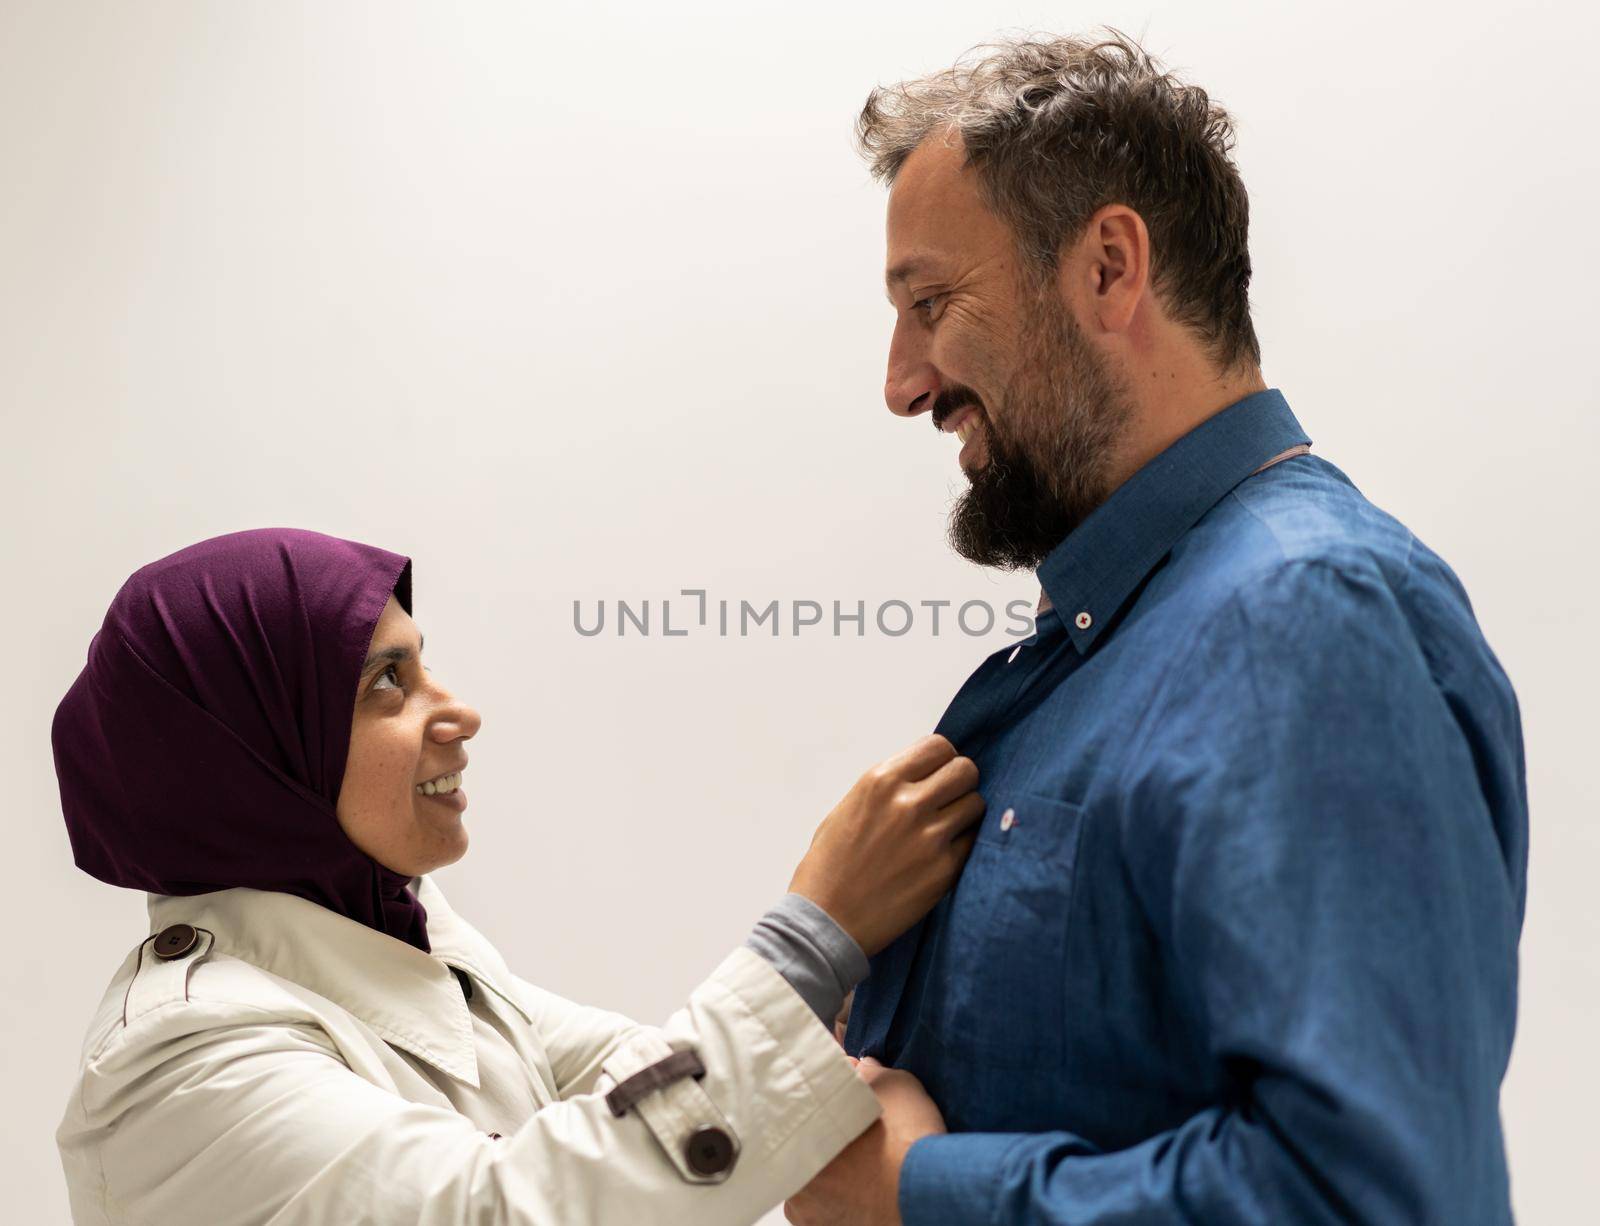 People, Woman helping man and adjusting tie on his neck with soft focus, care and clothing concept. High quality photo